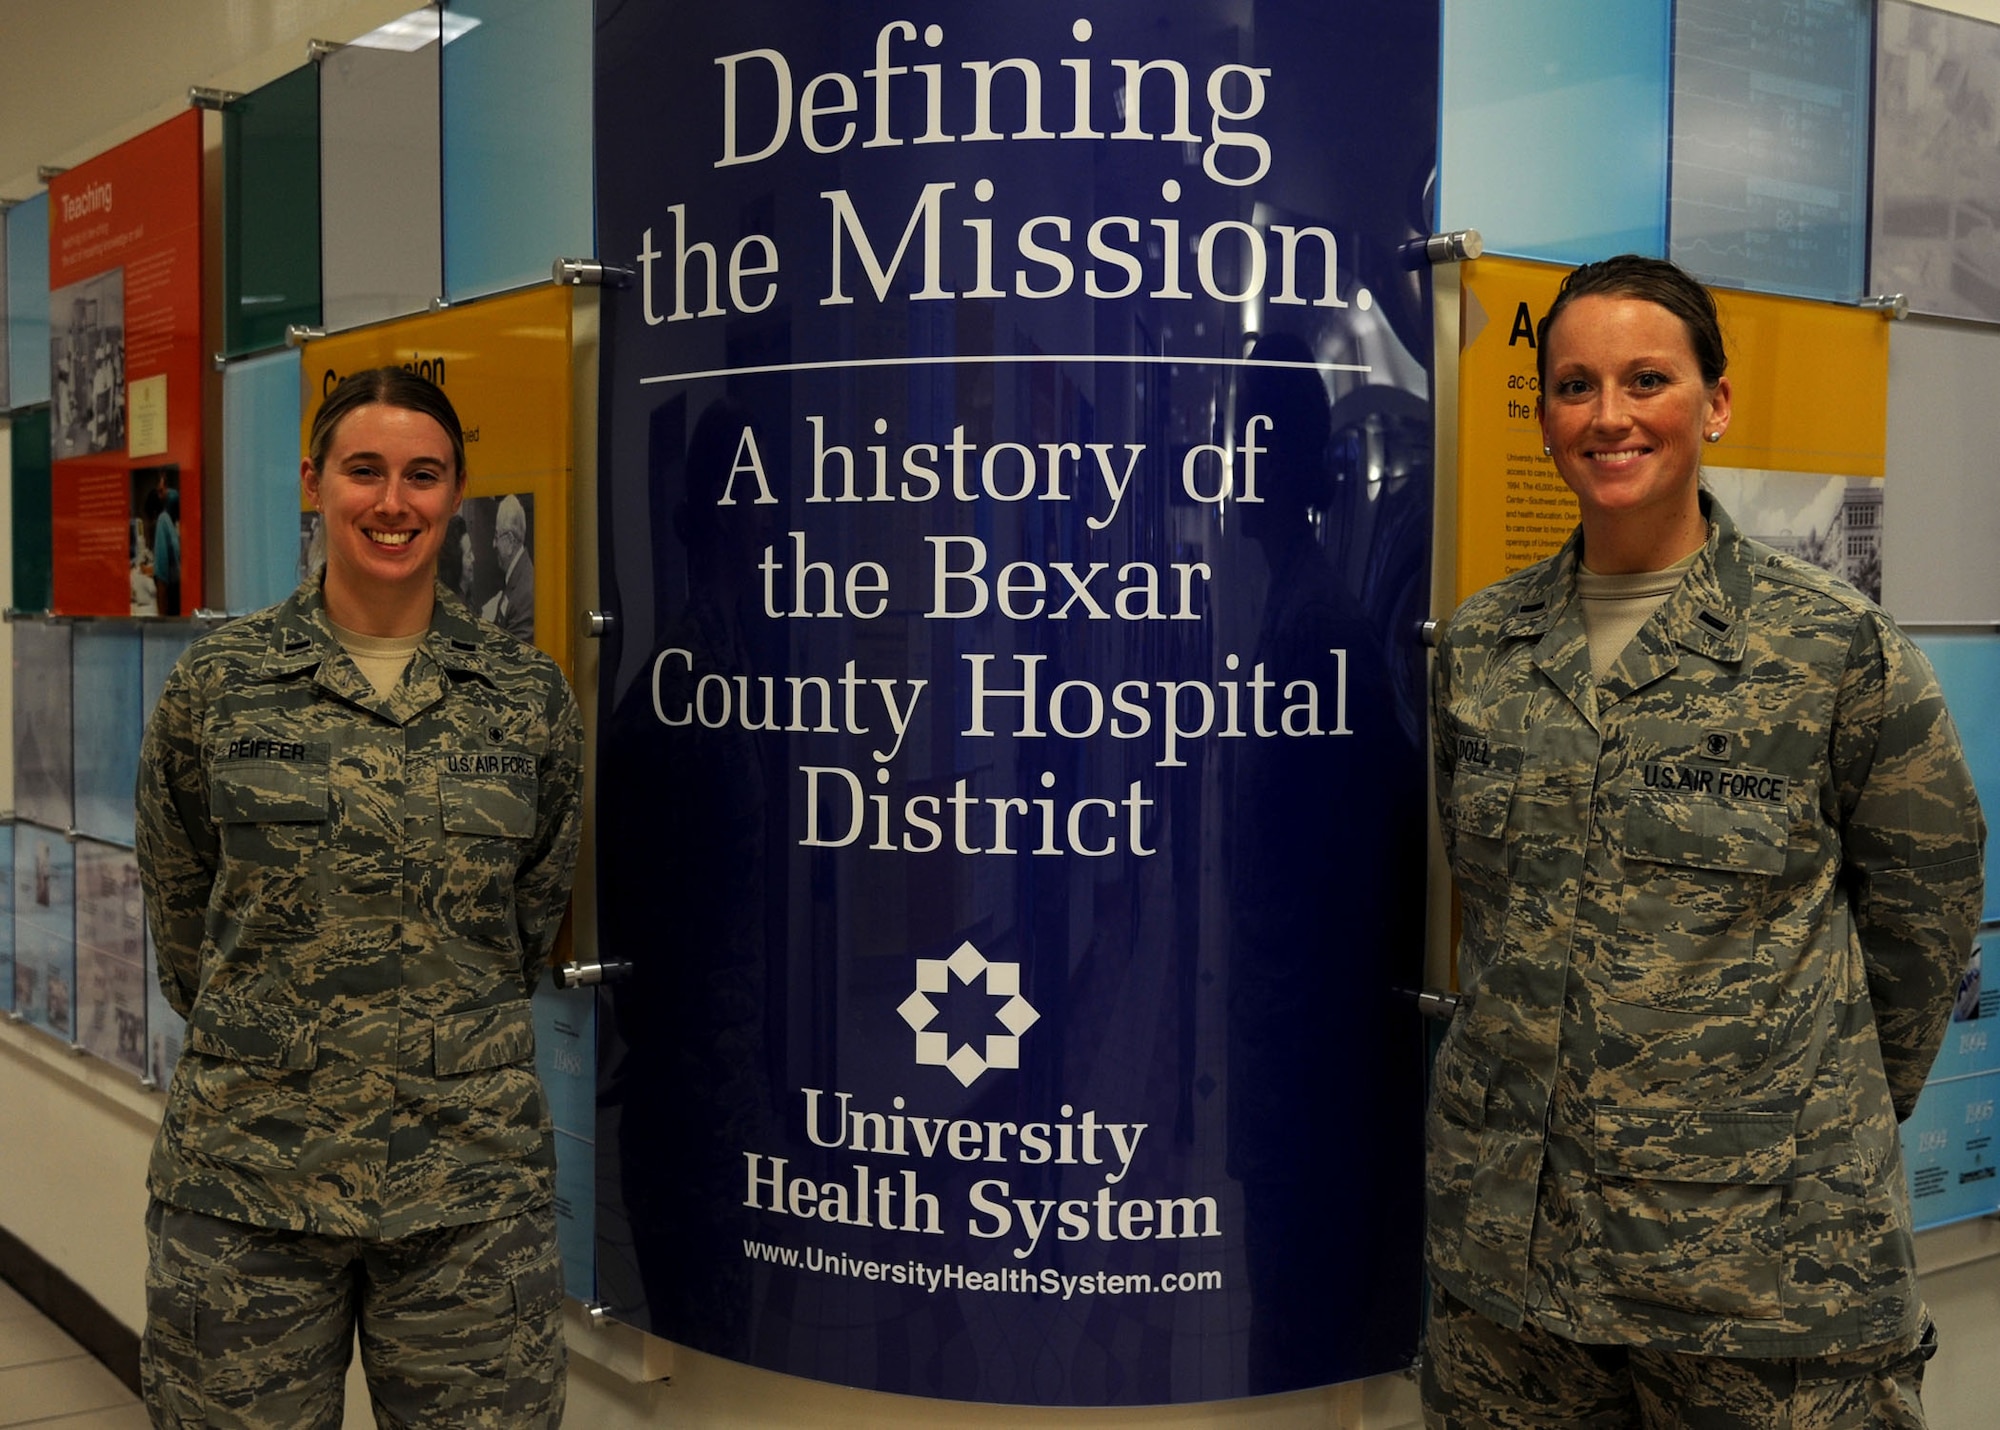 1st Lts. Meredith Peiffer and Casey Doll, critical care nurse fellows with the 59th Training Squadron, are the first participants under a new partnership between University Health System and the Air Force that allows for UHS to be a clinical training site for Air Force nurses.  (U.S. Air Force Photo/Staff Sgt. Micky M. Bazaldua)